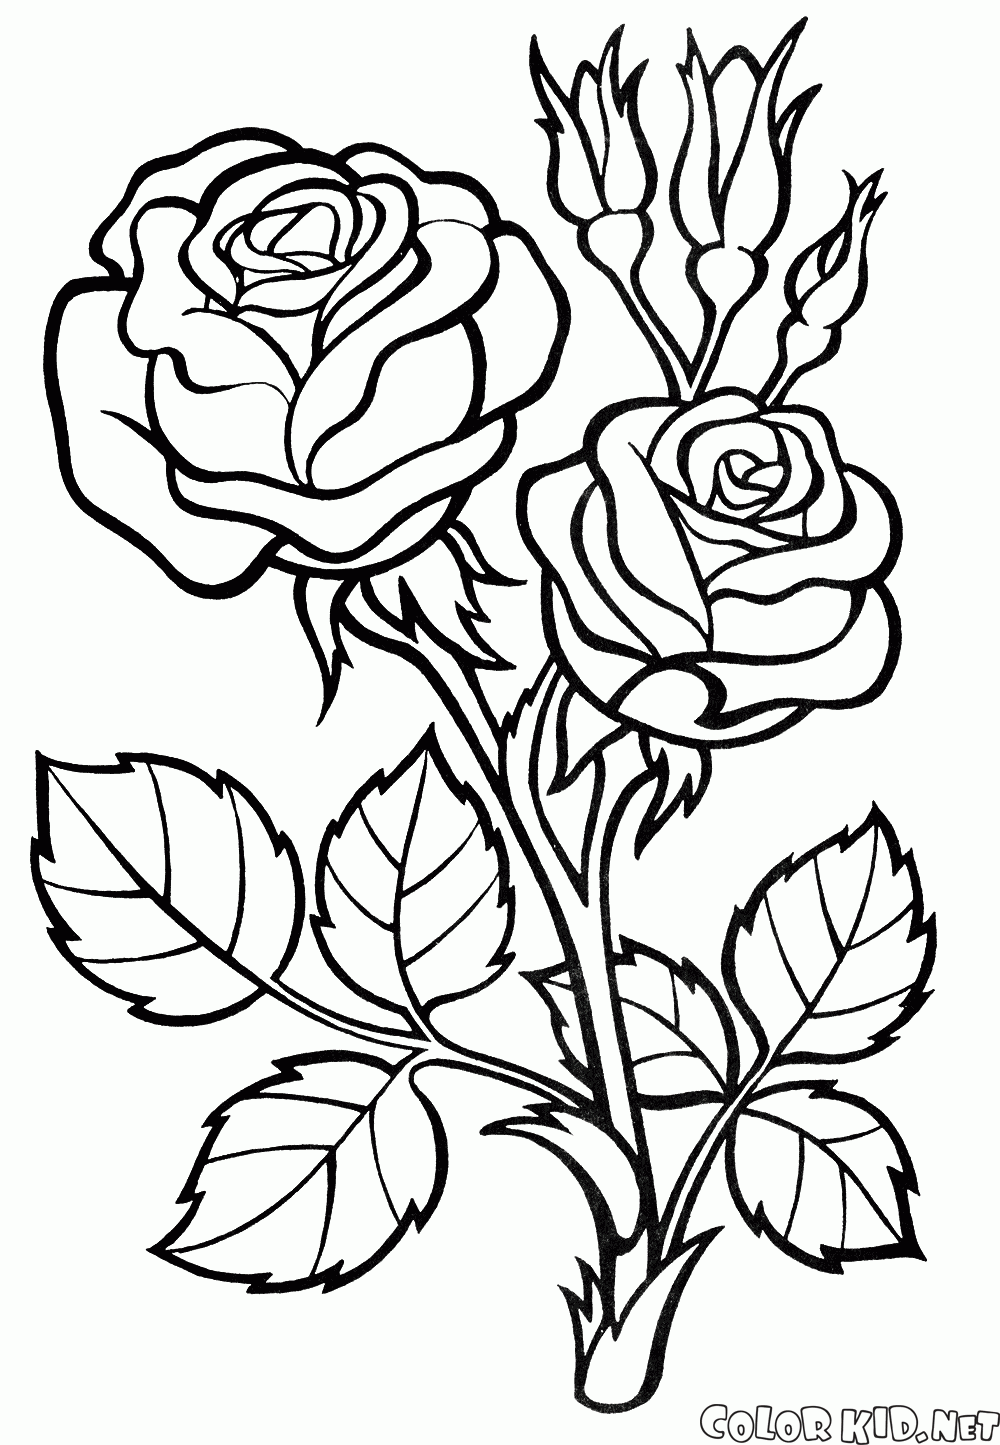 Coloring page - Rose